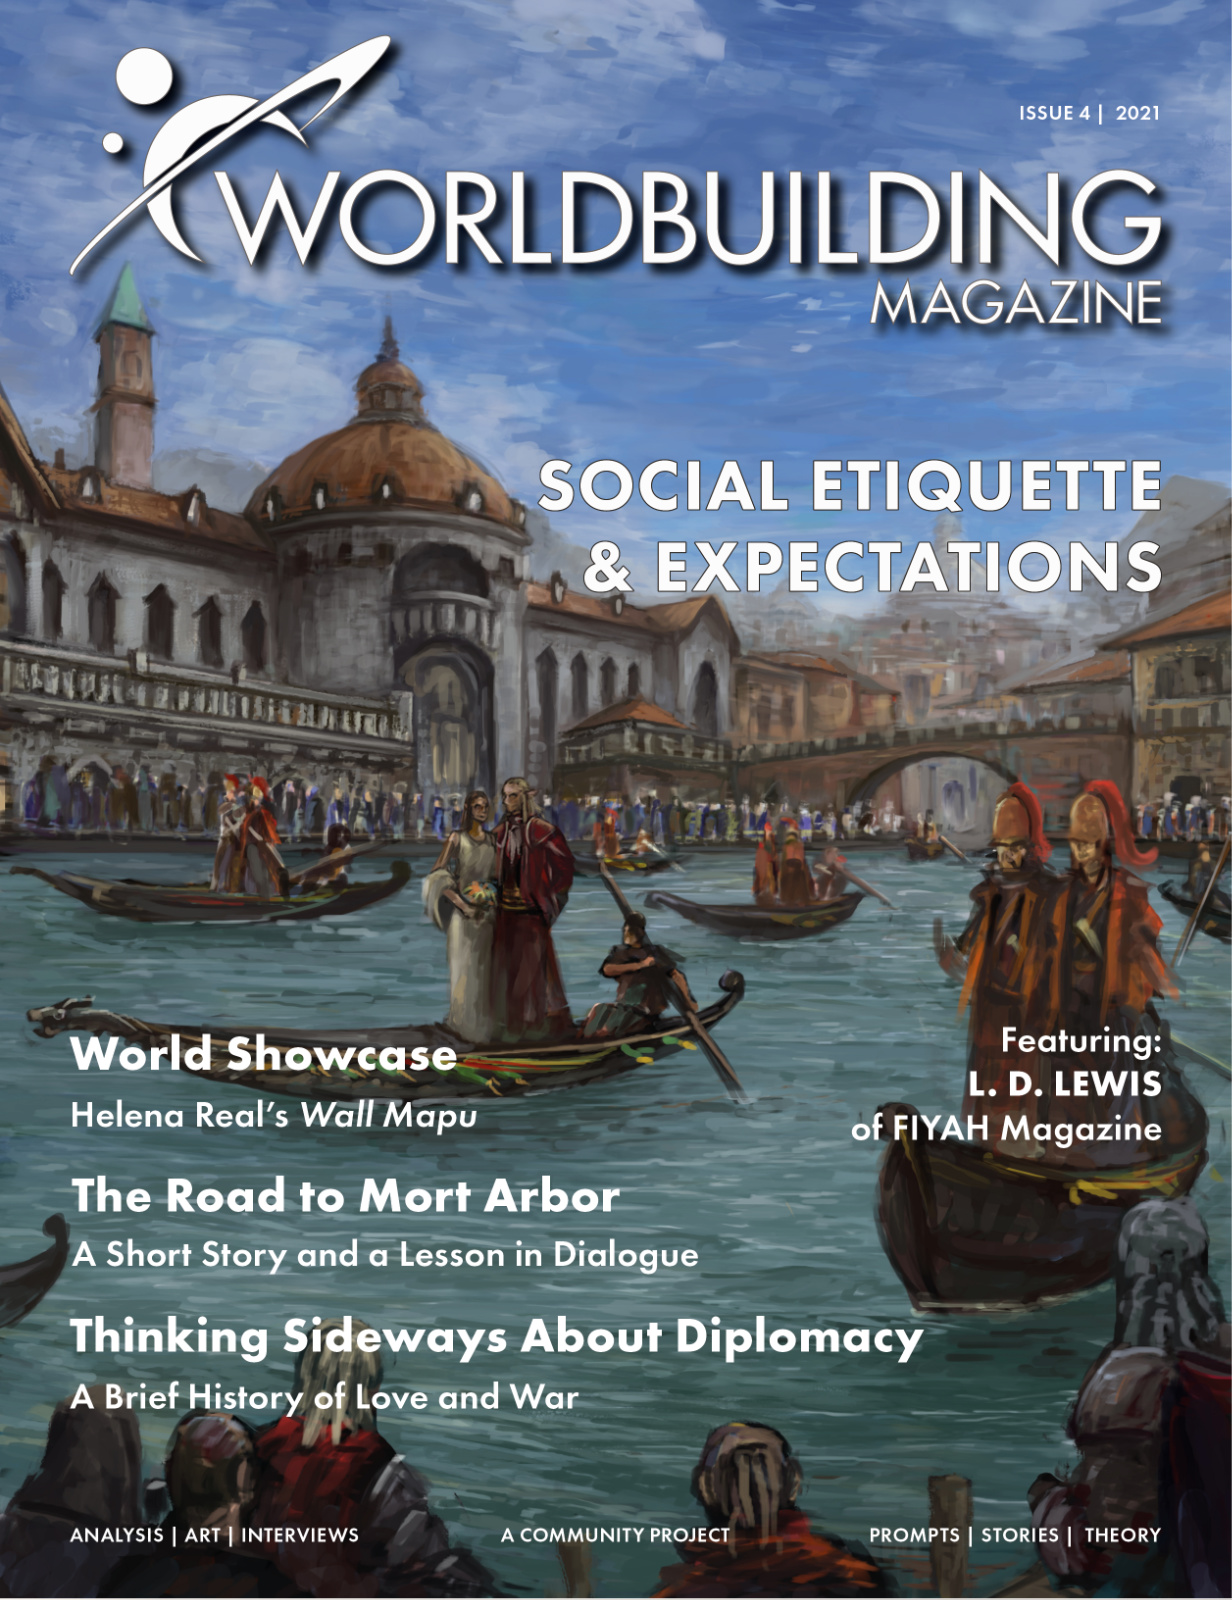 Worldbuilding Magazine Volume 5, Issue 4: Social Etiquette and Expectations